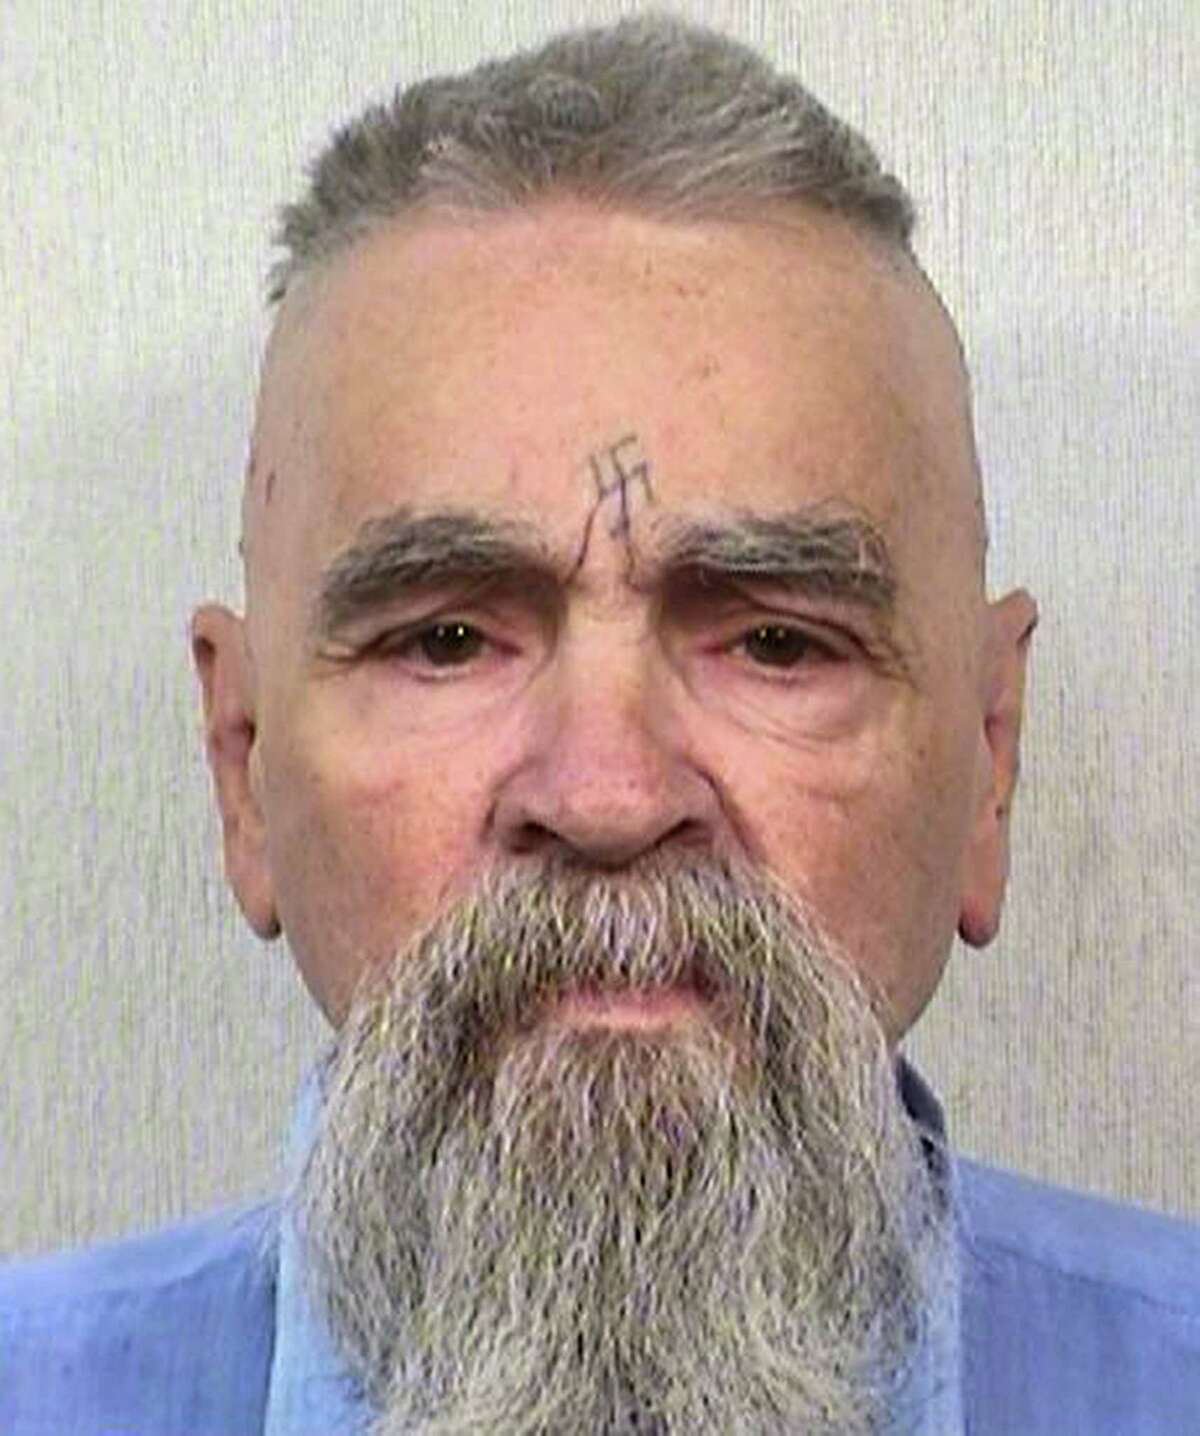 This Oct. 8, 2014, photo provided by the California Department of Corrections shows 80-year-old serial killer Charles Manson. A marriage license has been issued for Manson to wed 26-year-old Afton Elaine Burton, who left her Midwestern home nine years ago and moved to Corcoran, California to be near him. Burton, who goes by the name “Star,” told the AP that she and Manson will be married next month.